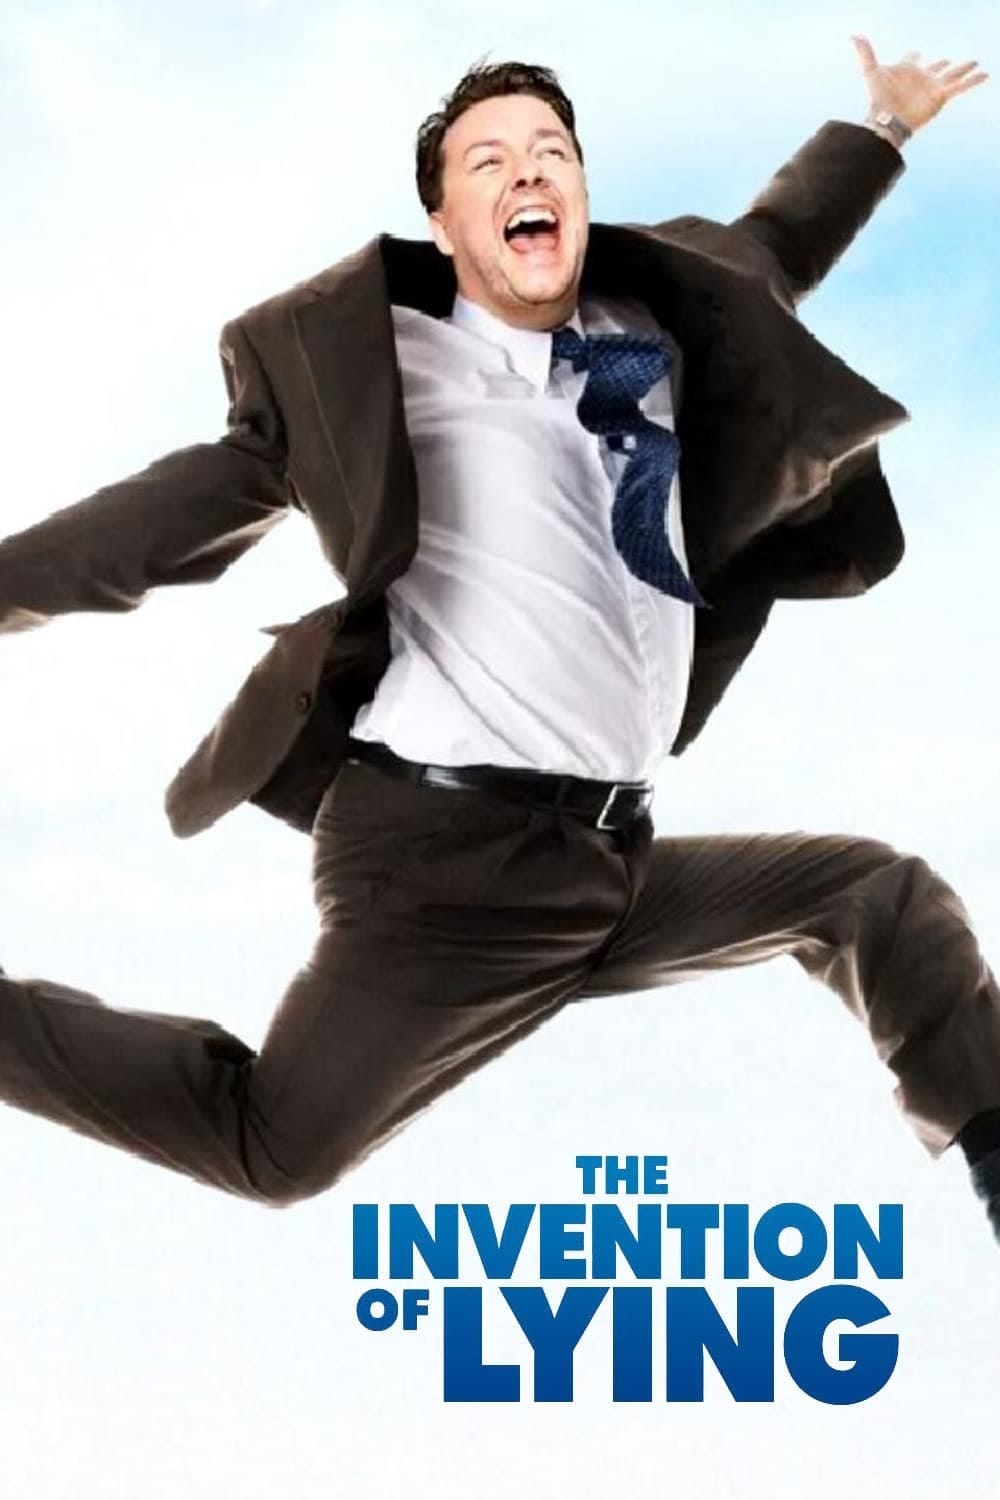 The Invention of Lying (2009) | Poster